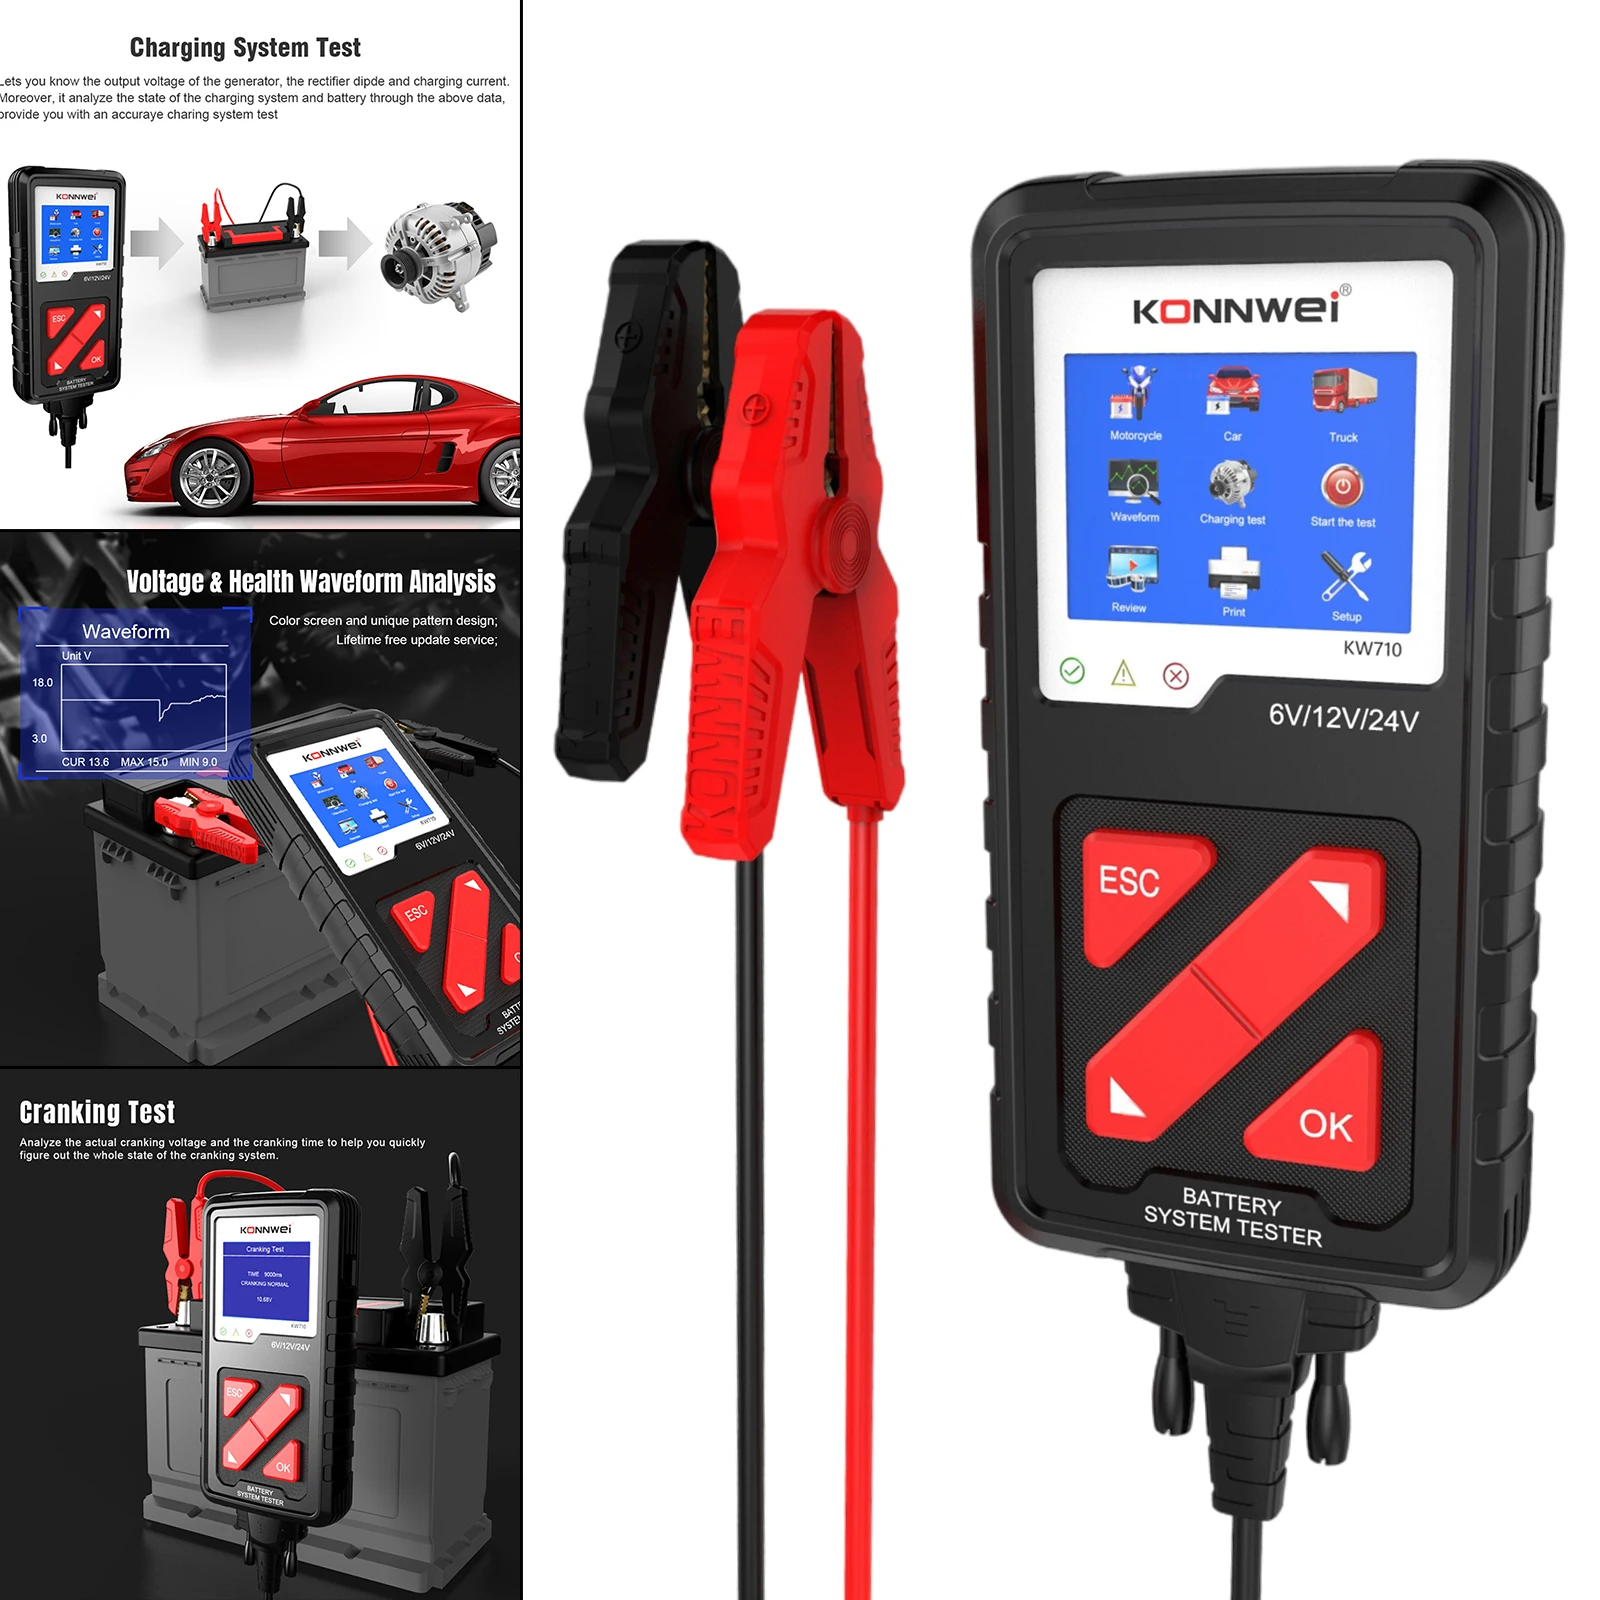 Professional Battery Tester 6V 12V 24V Cranking and Charging System Tester Diagnosis Tool for Car Quick Tester Analyzer